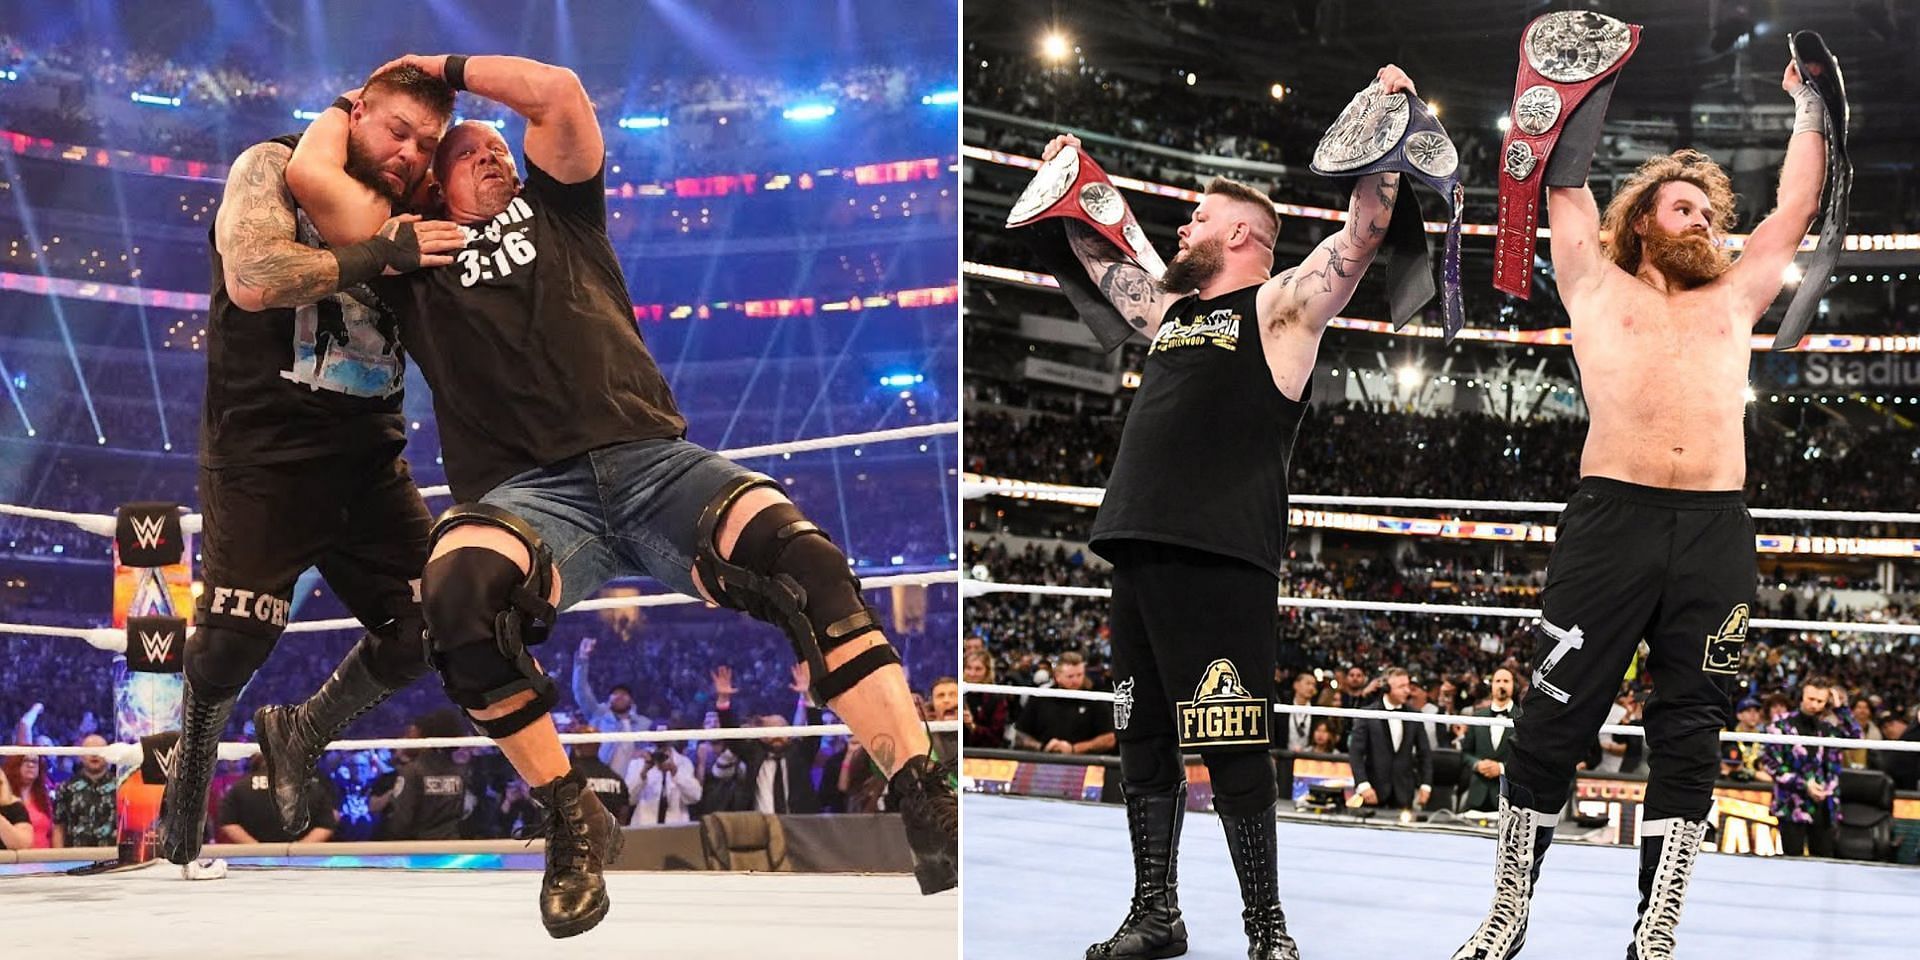 Kevin Owens headlined WrestleMania 38 and 39